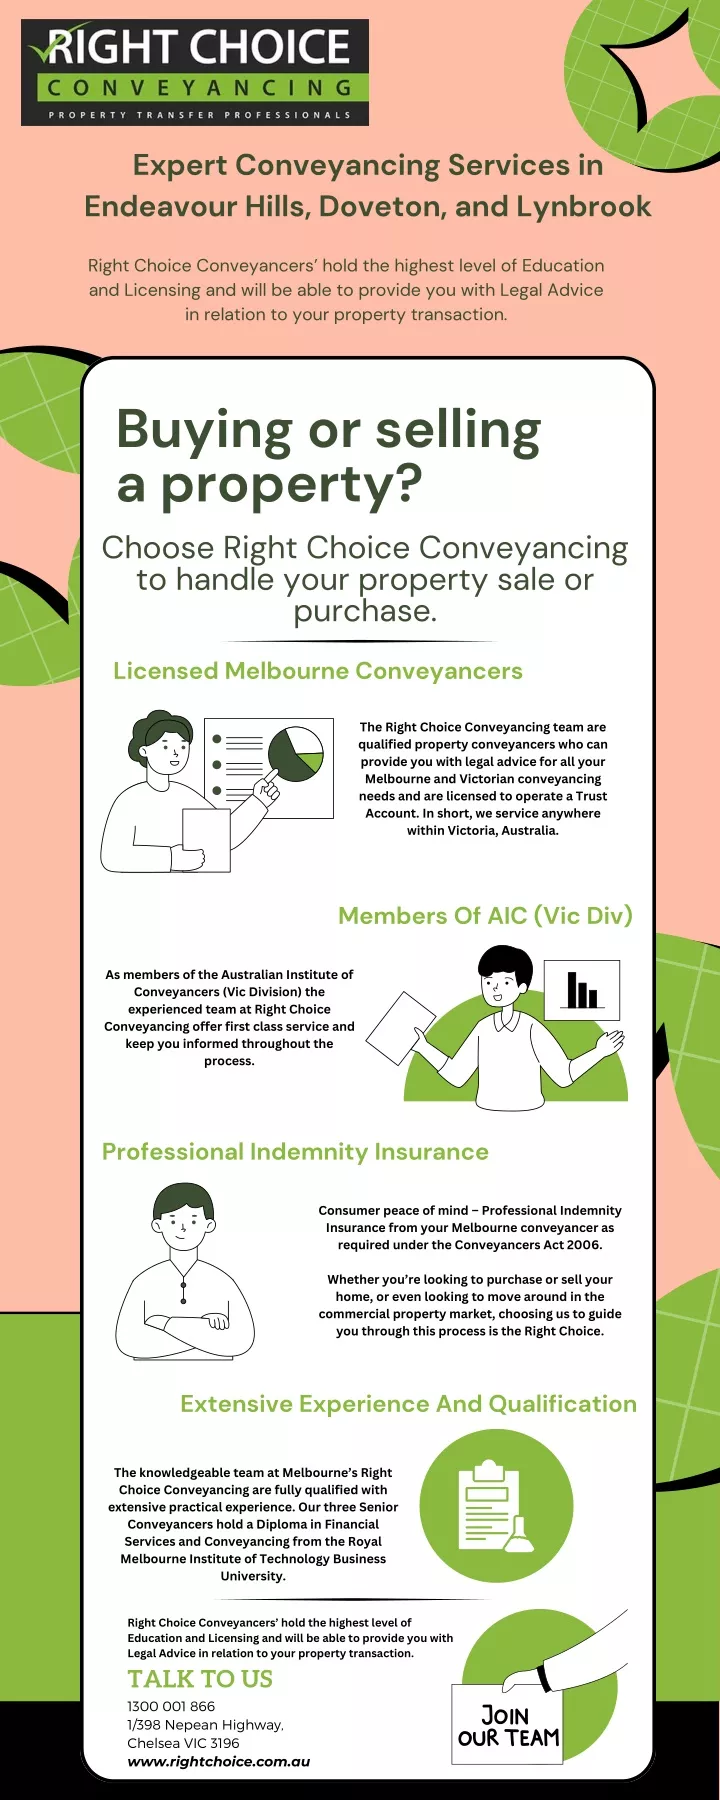 expert conveyancing services in endeavour hills